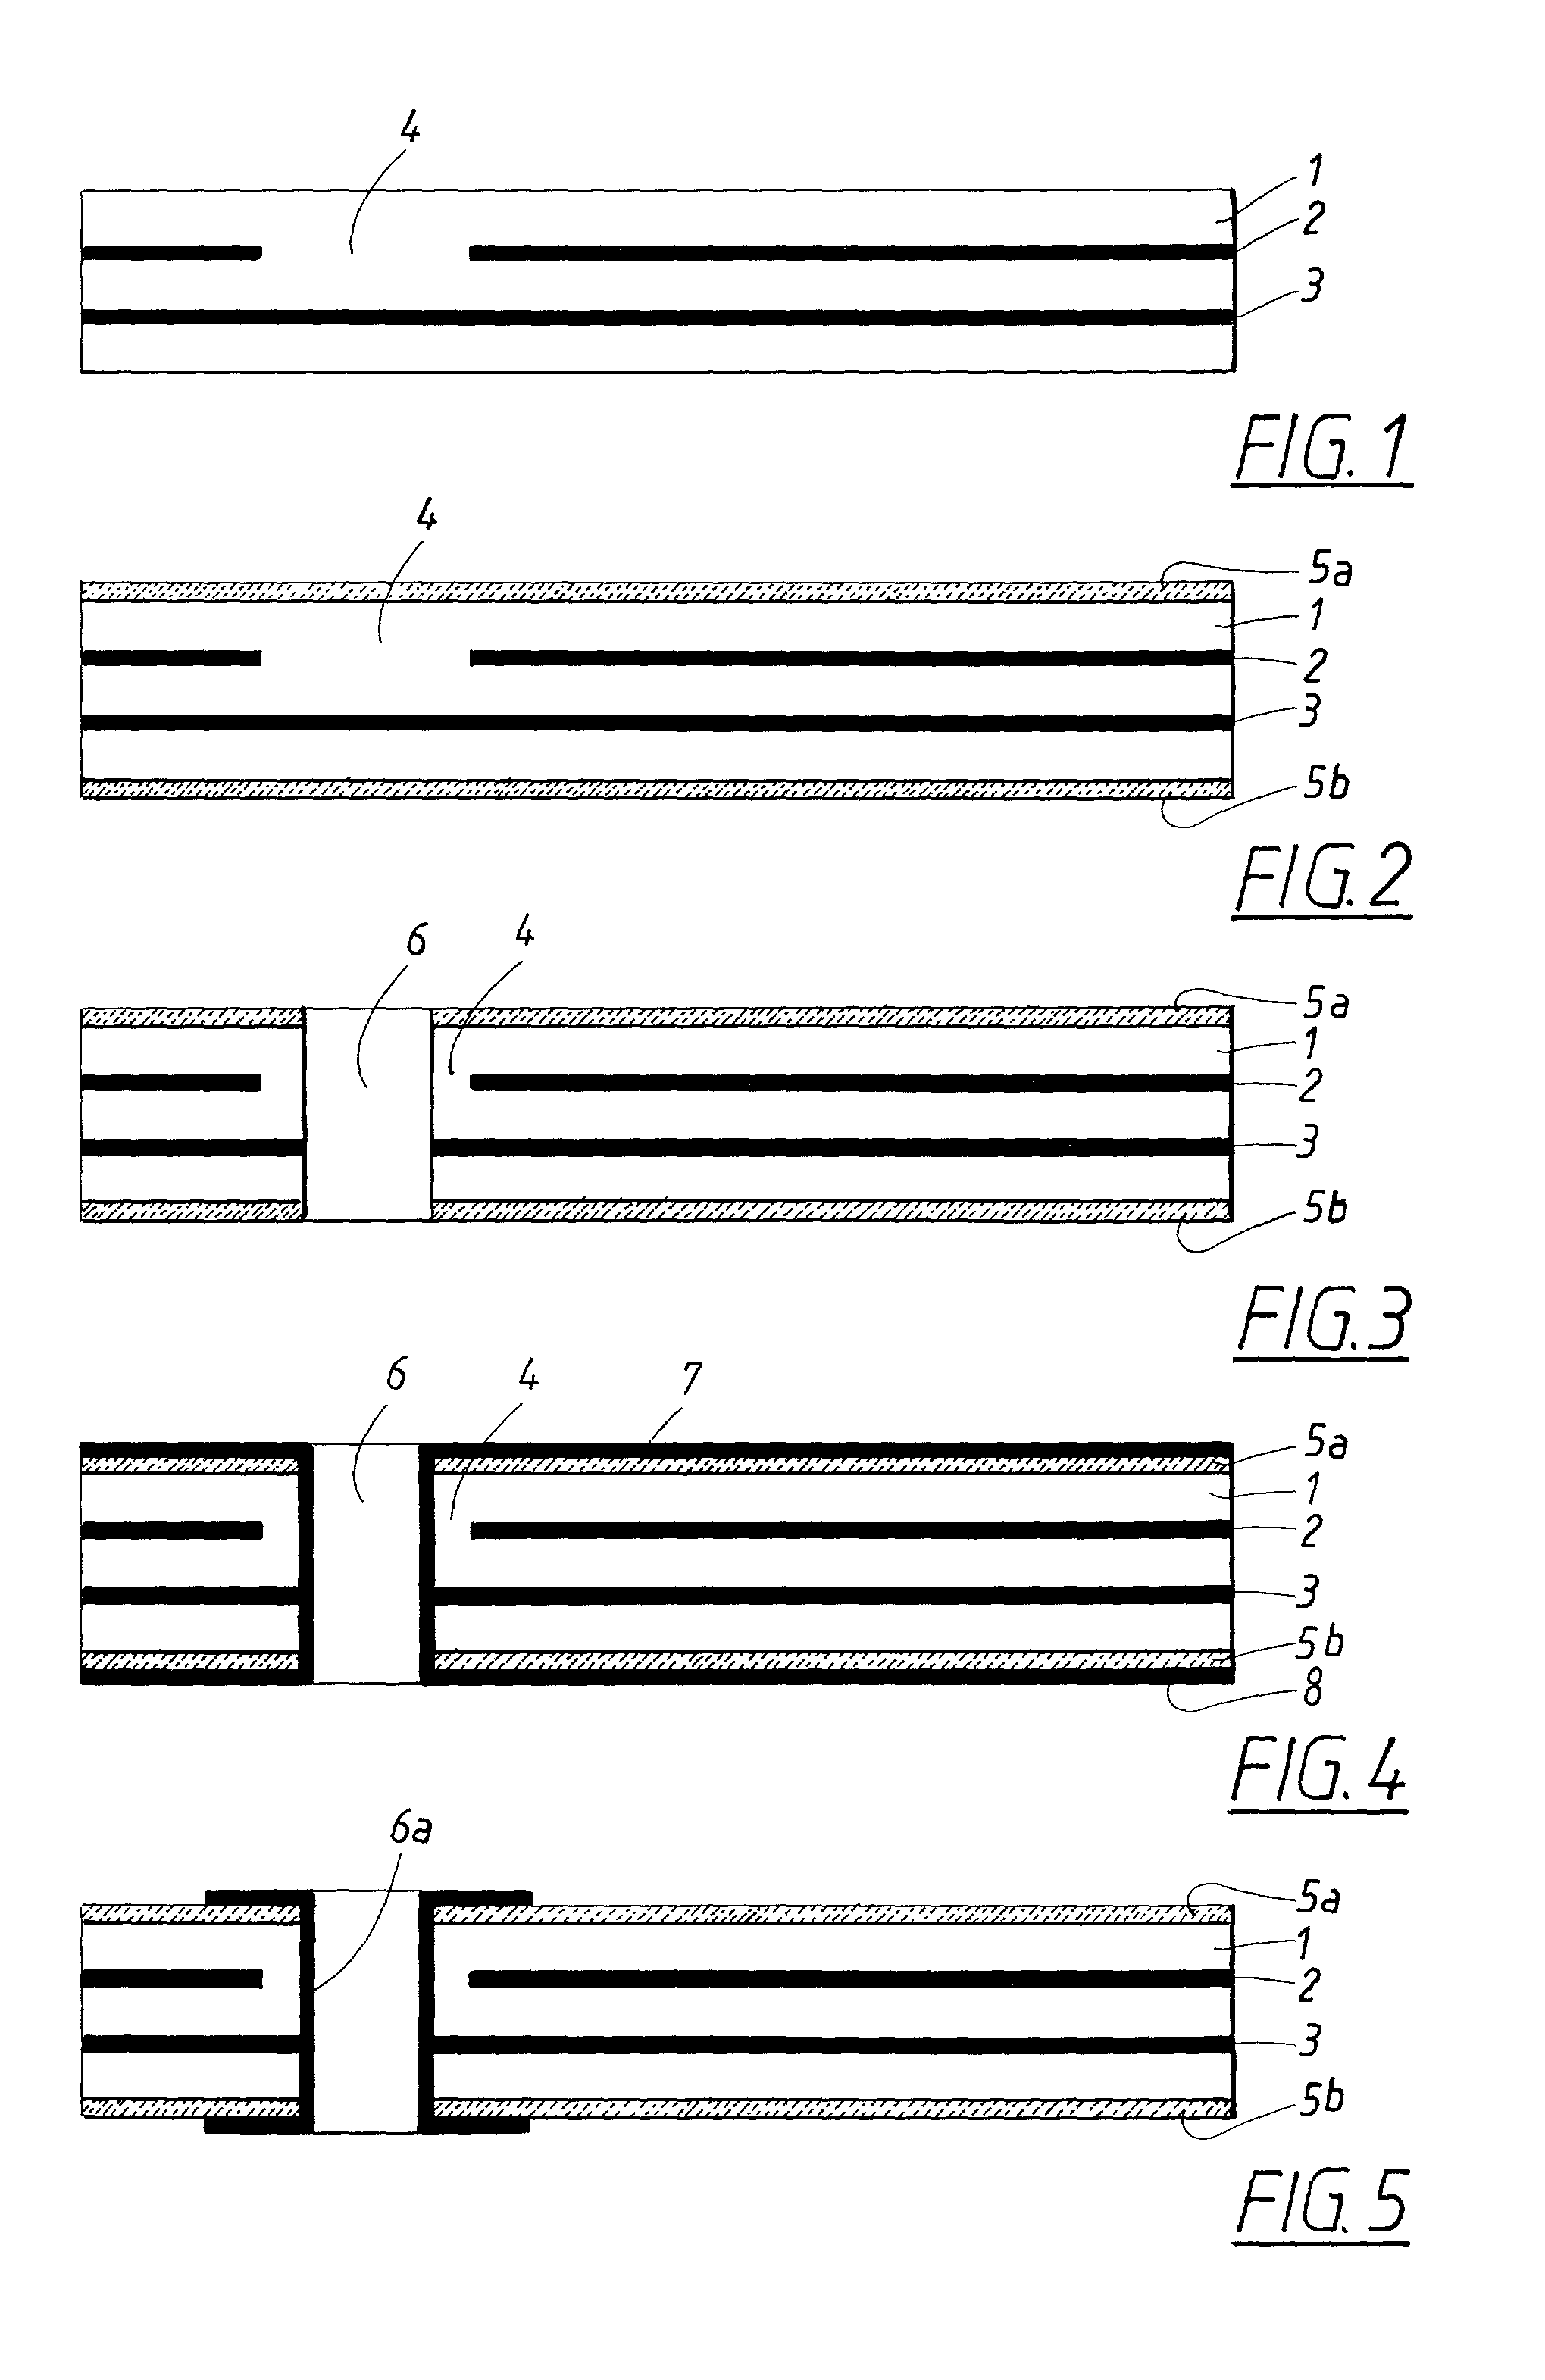 PCB and method for making PCB with thin copper layer